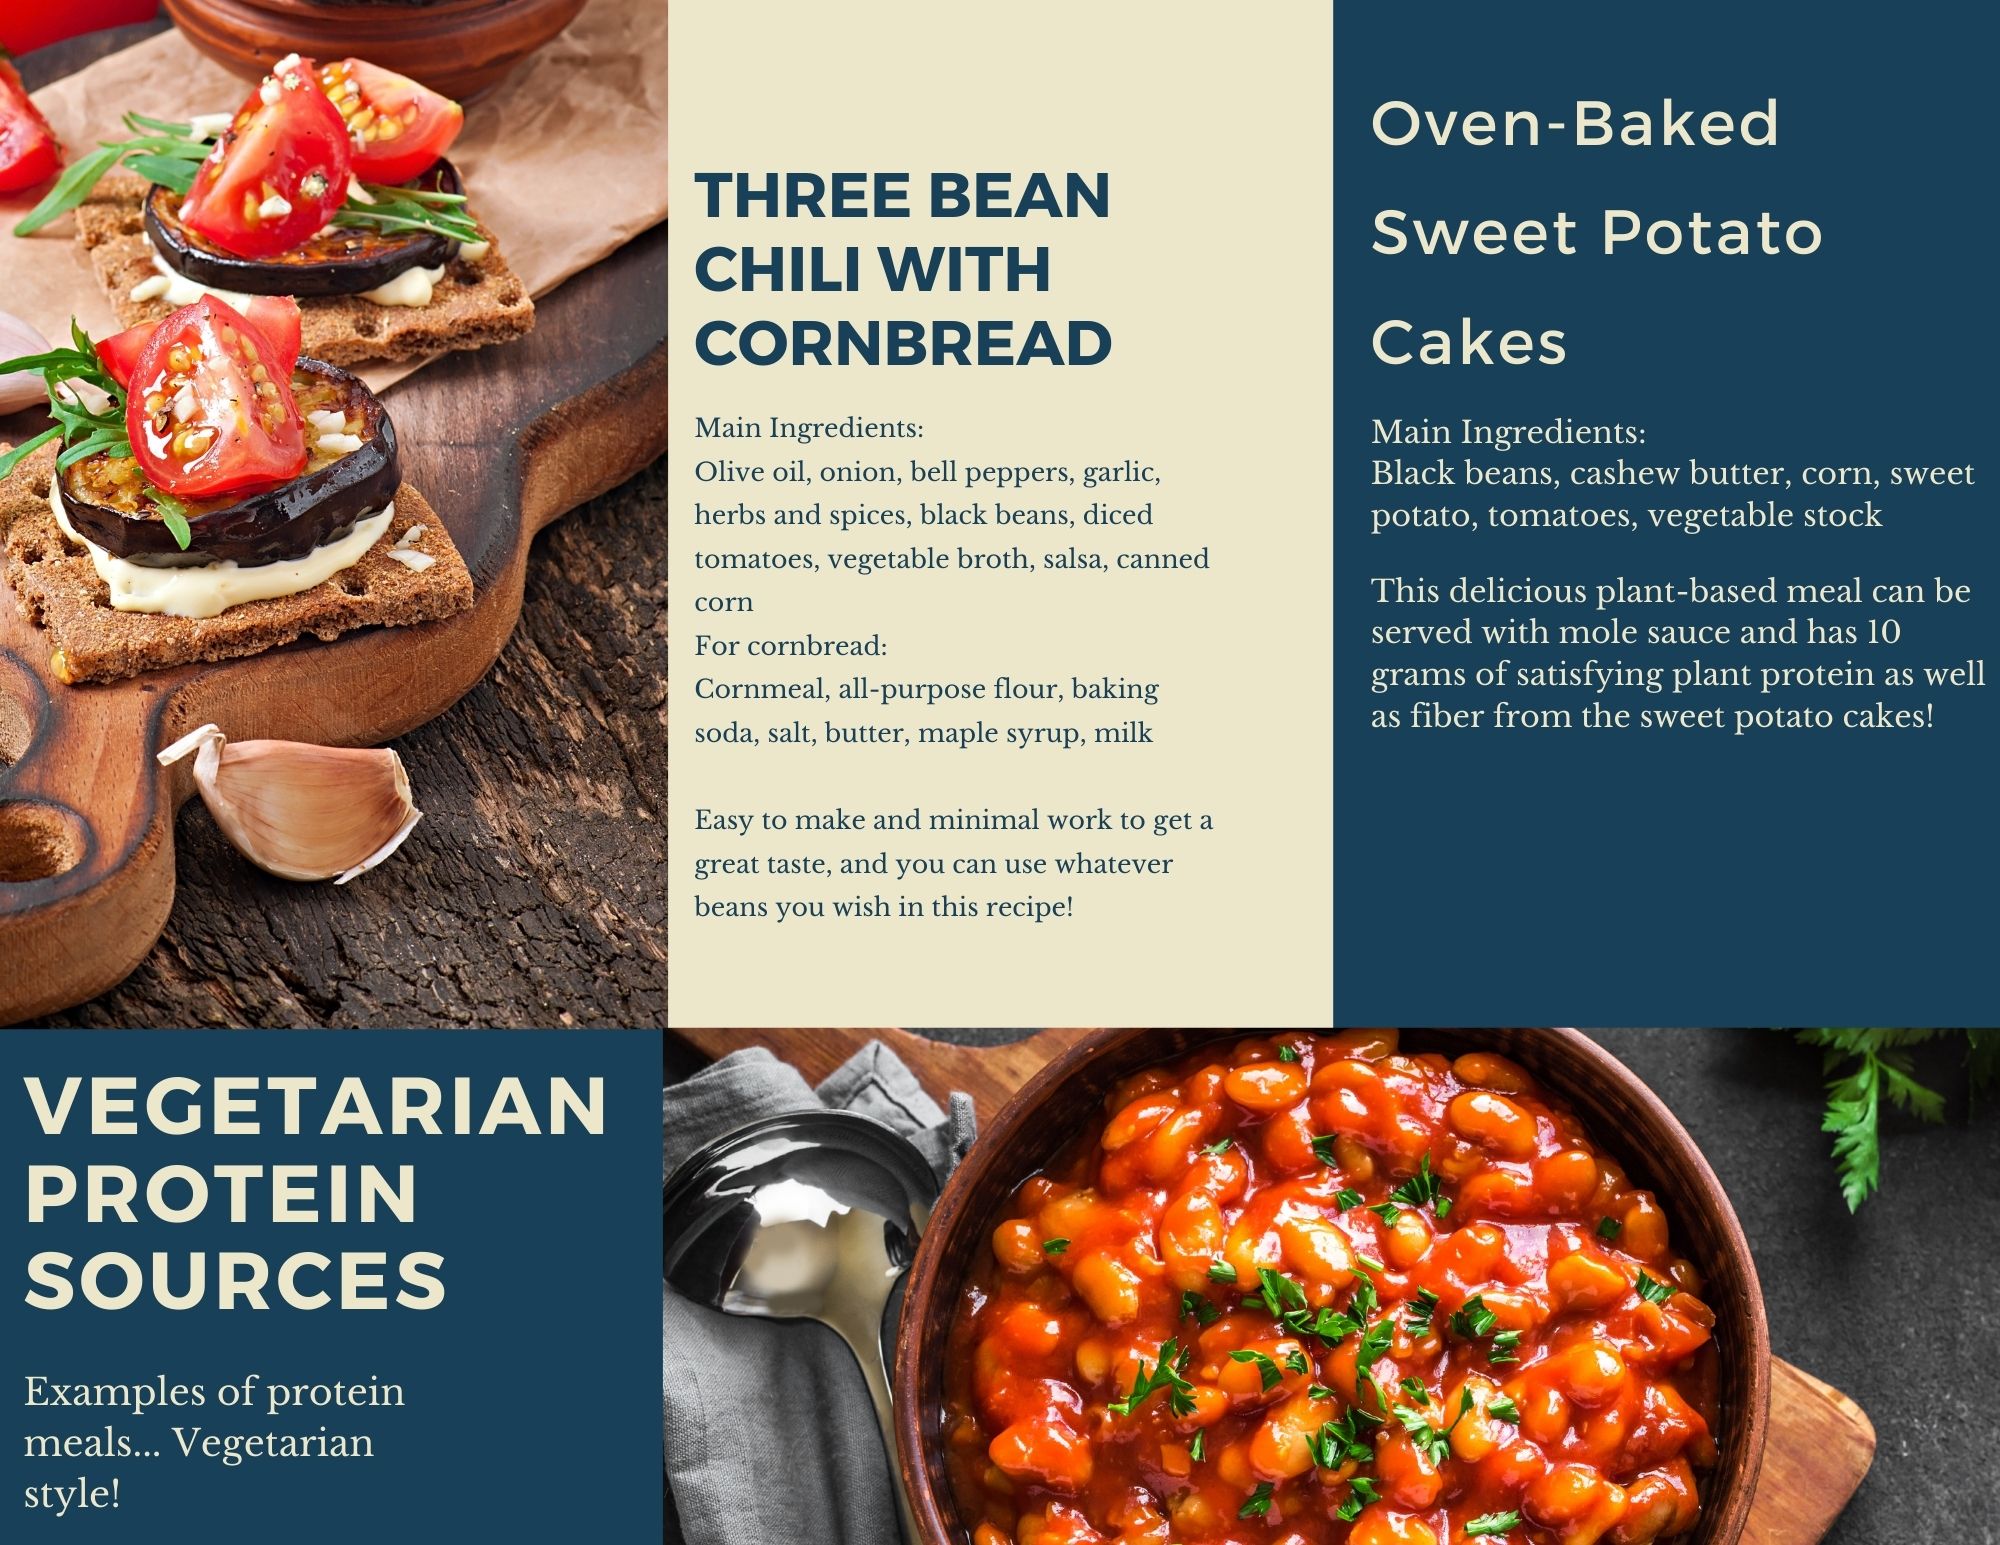 Recipes for vegetarian meals high in protein